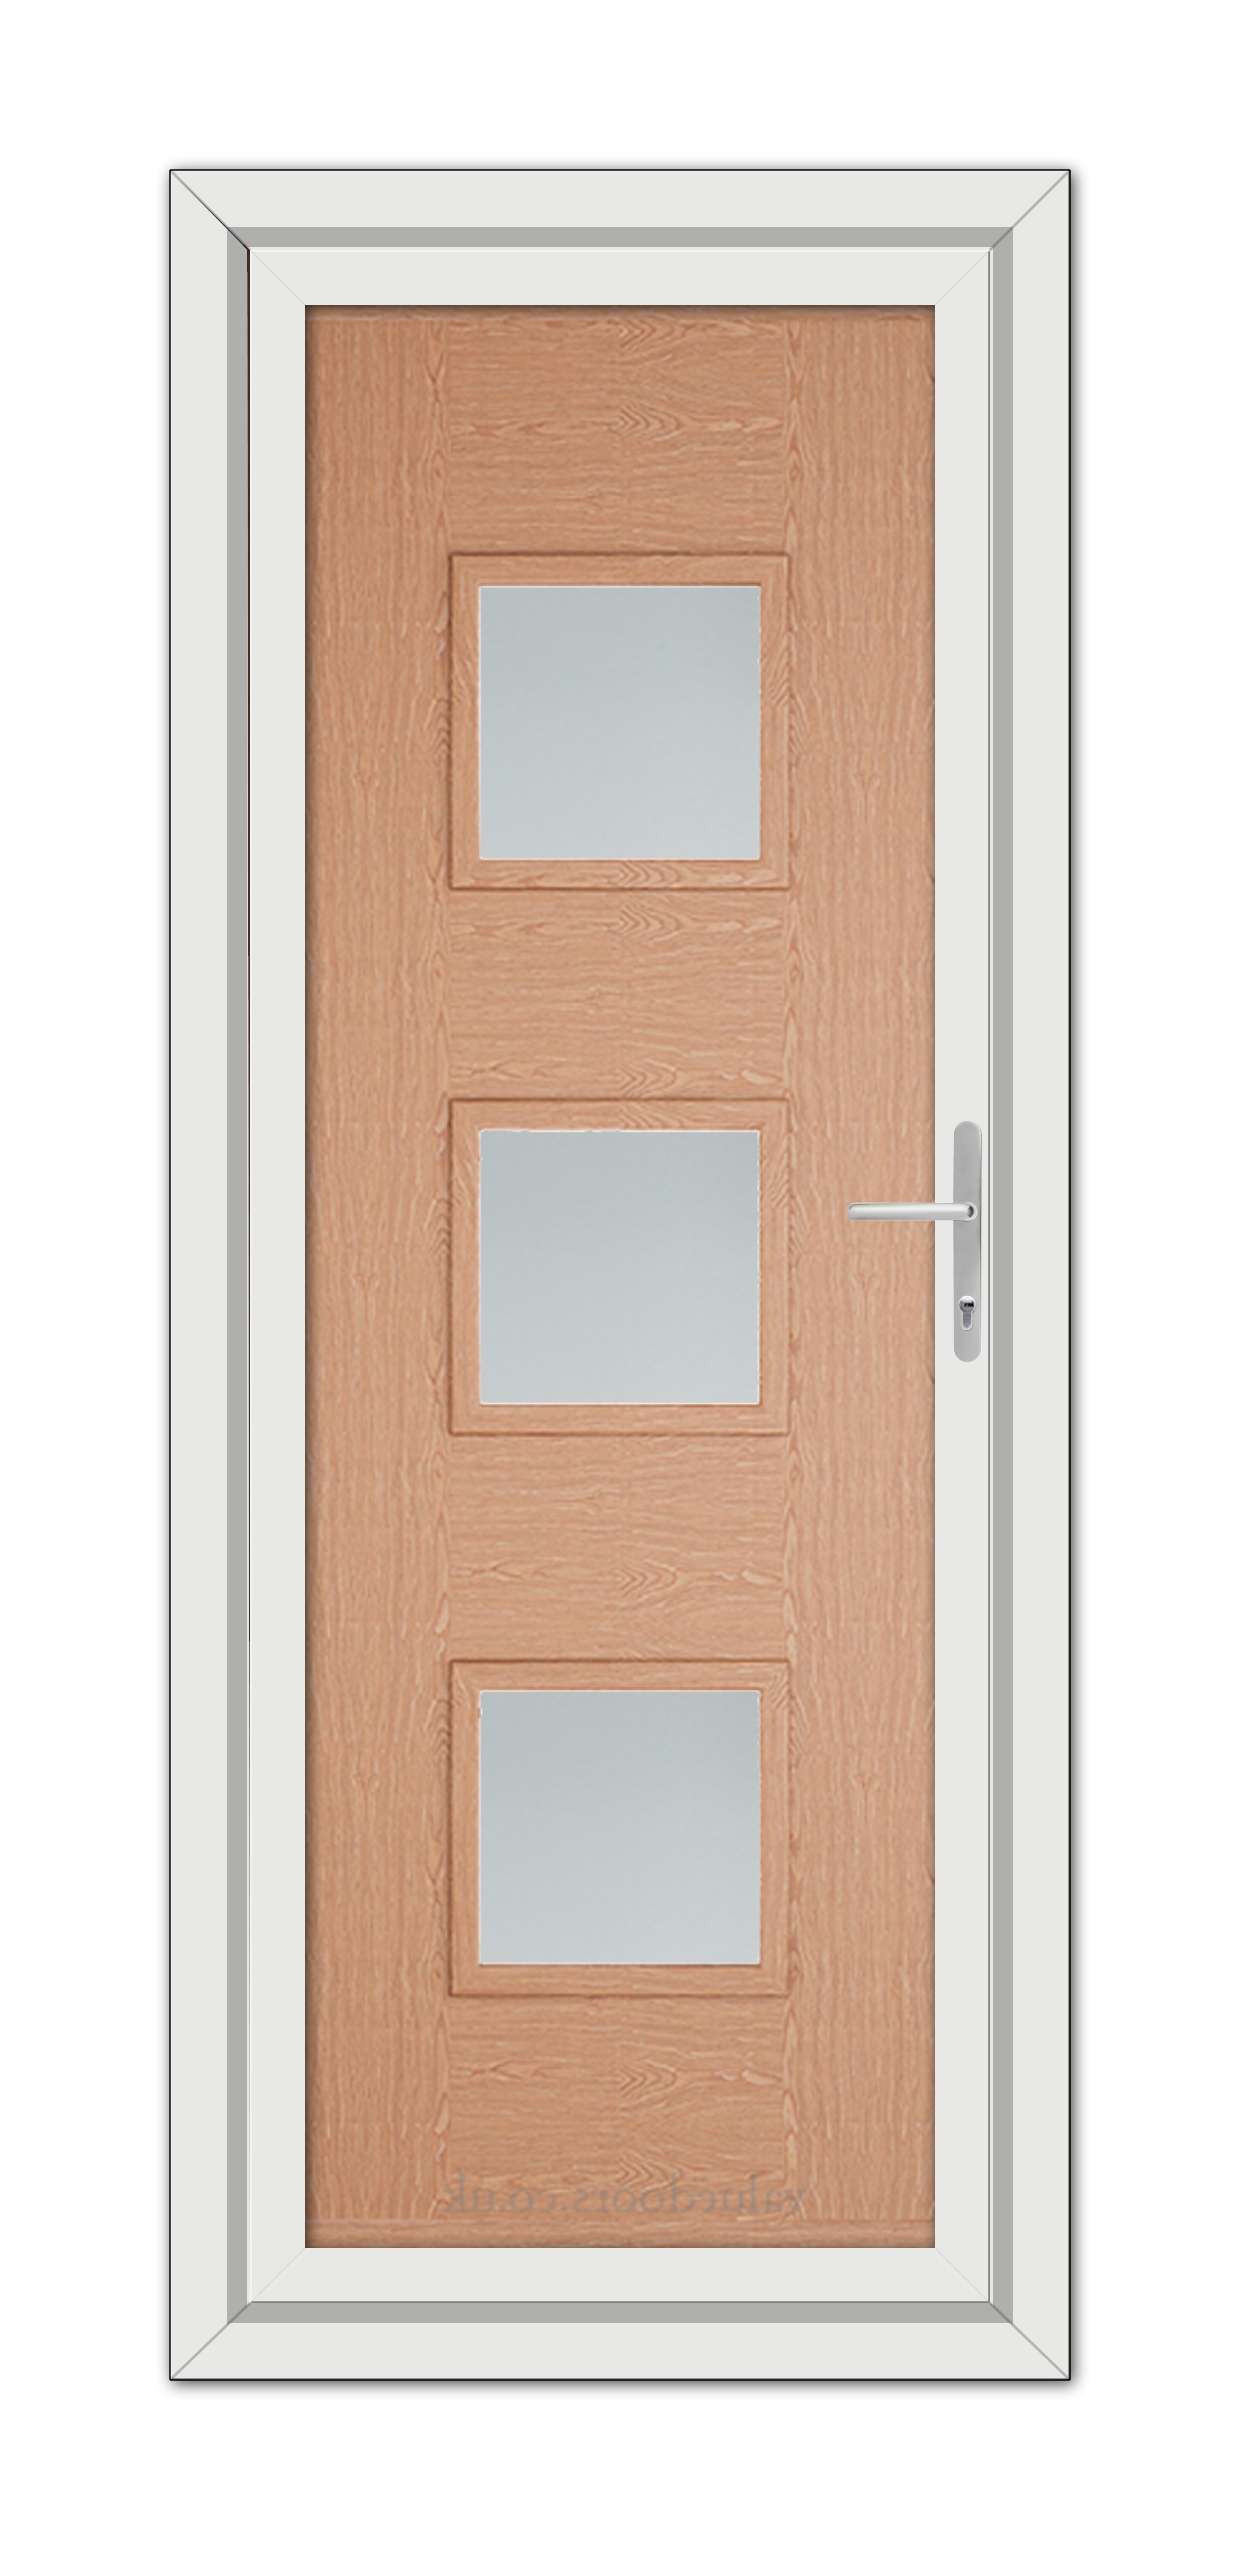 An Irish Oak Modern 5013 uPVC door with three vertical frosted glass panels, set within a white frame, featuring a silver handle on the right.